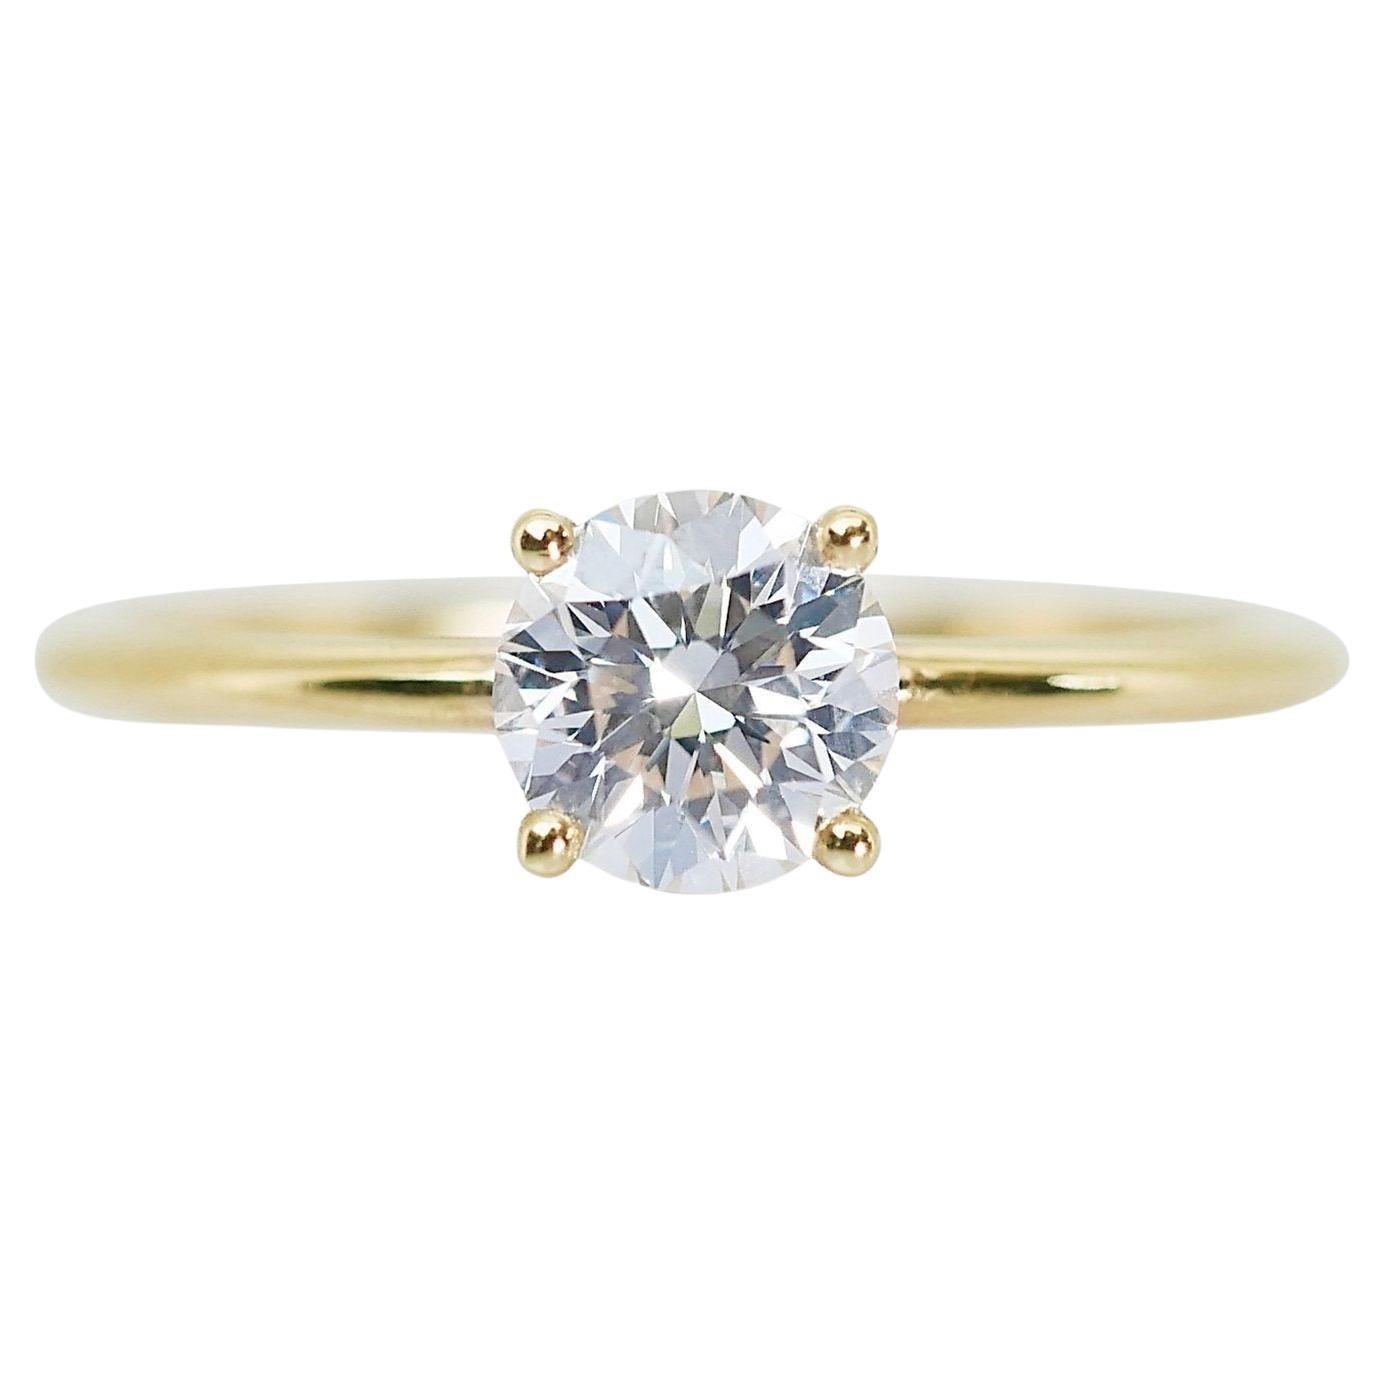 Radiant 1.02ct Round Solitaire Diamond Ring in 18k Yellow Gold - GIA Certified For Sale